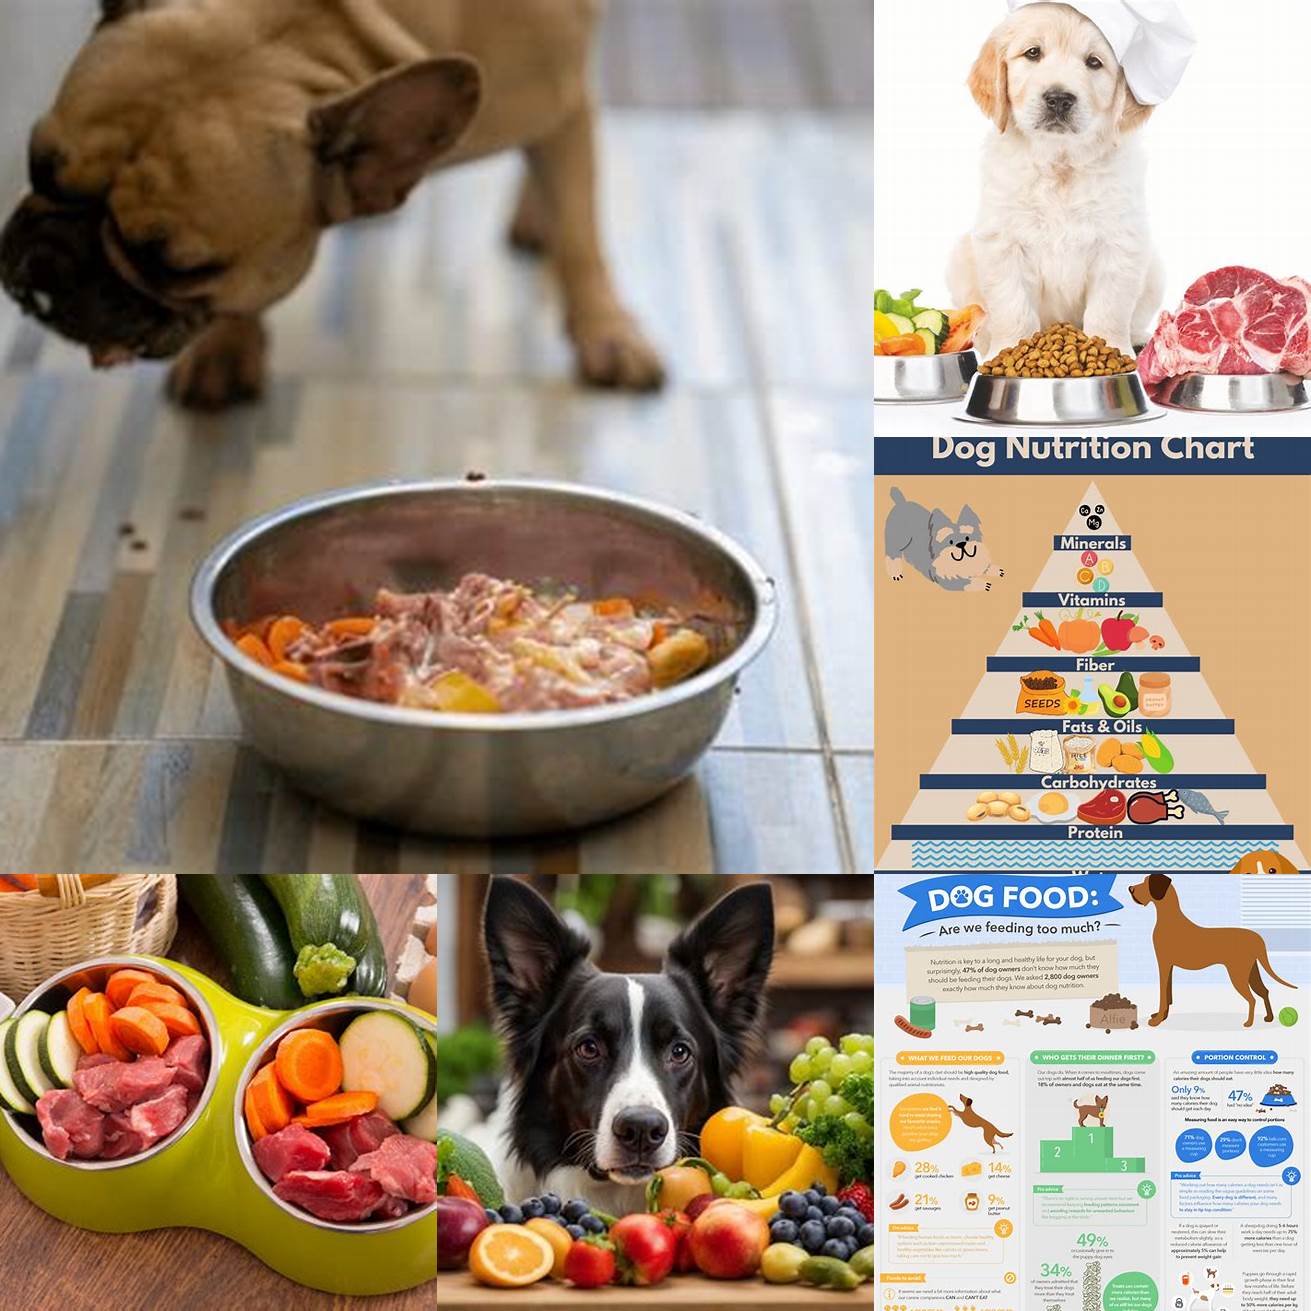 Feed your dog a balanced diet that is formulated for their specific nutritional needs